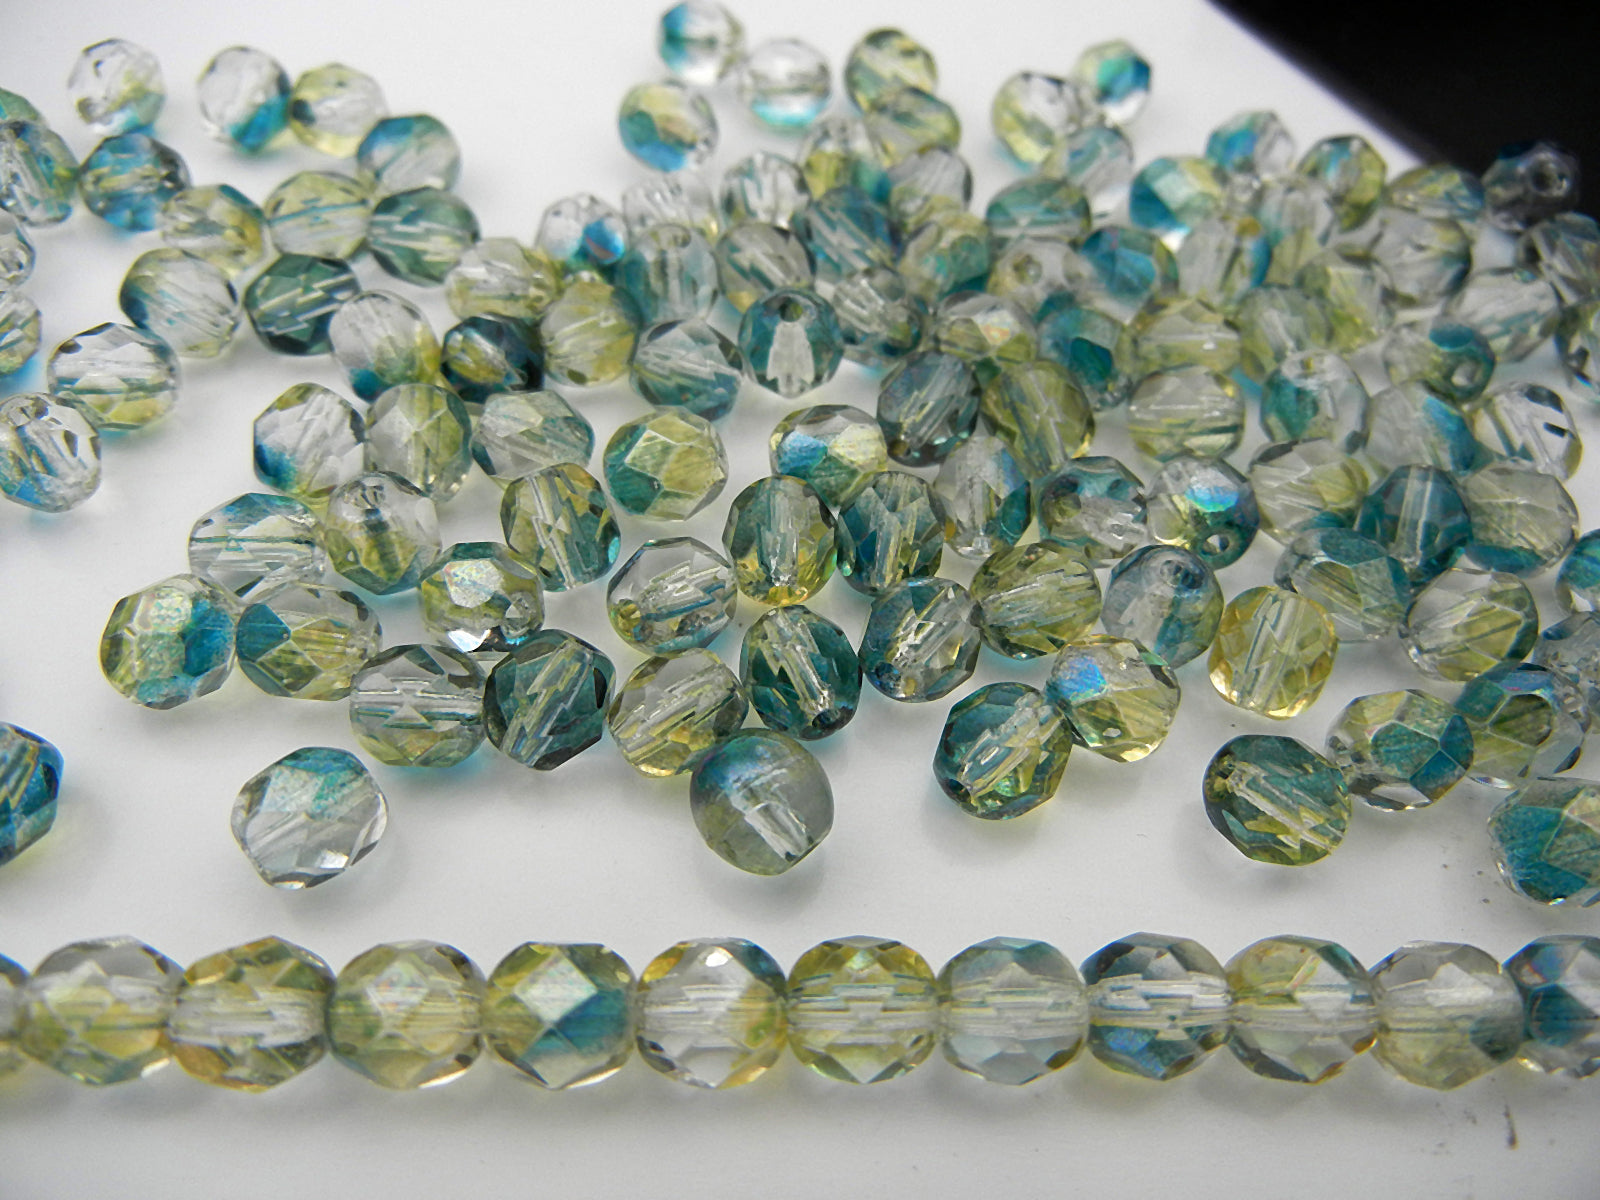 Crystal Oceanic Luster coated, Czech Fire Polished Round Faceted Glass Beads, clear-green-yellow